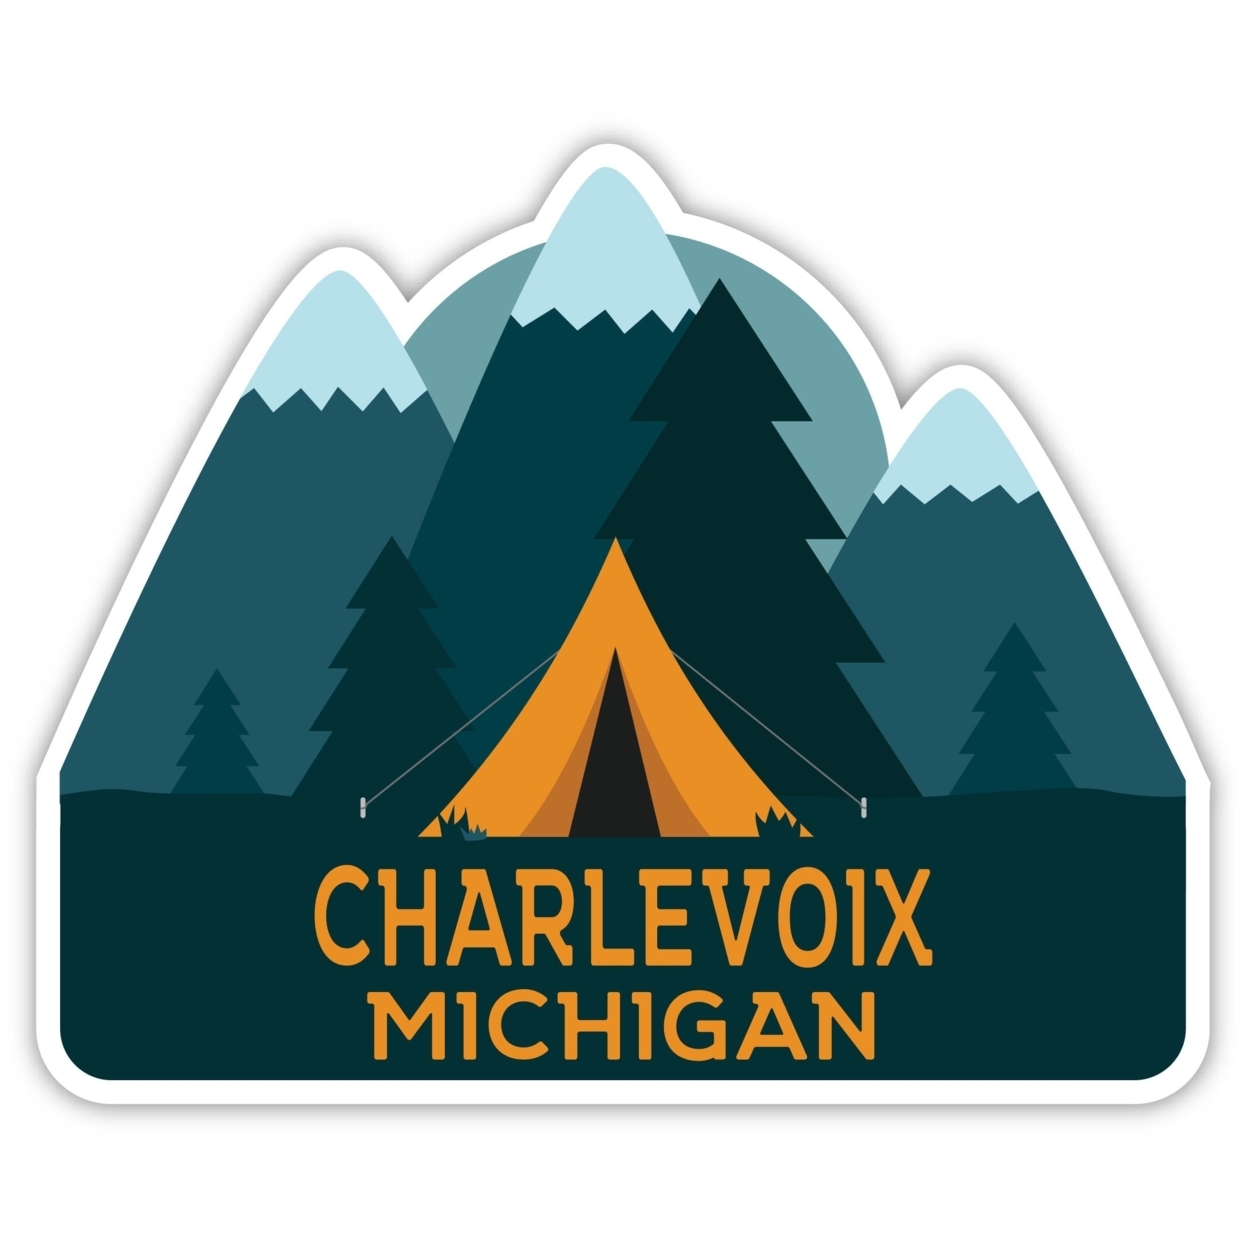 Charlevoix Michigan Souvenir Decorative Stickers (Choose Theme And Size) - 4-Pack, 2-Inch, Adventures Awaits